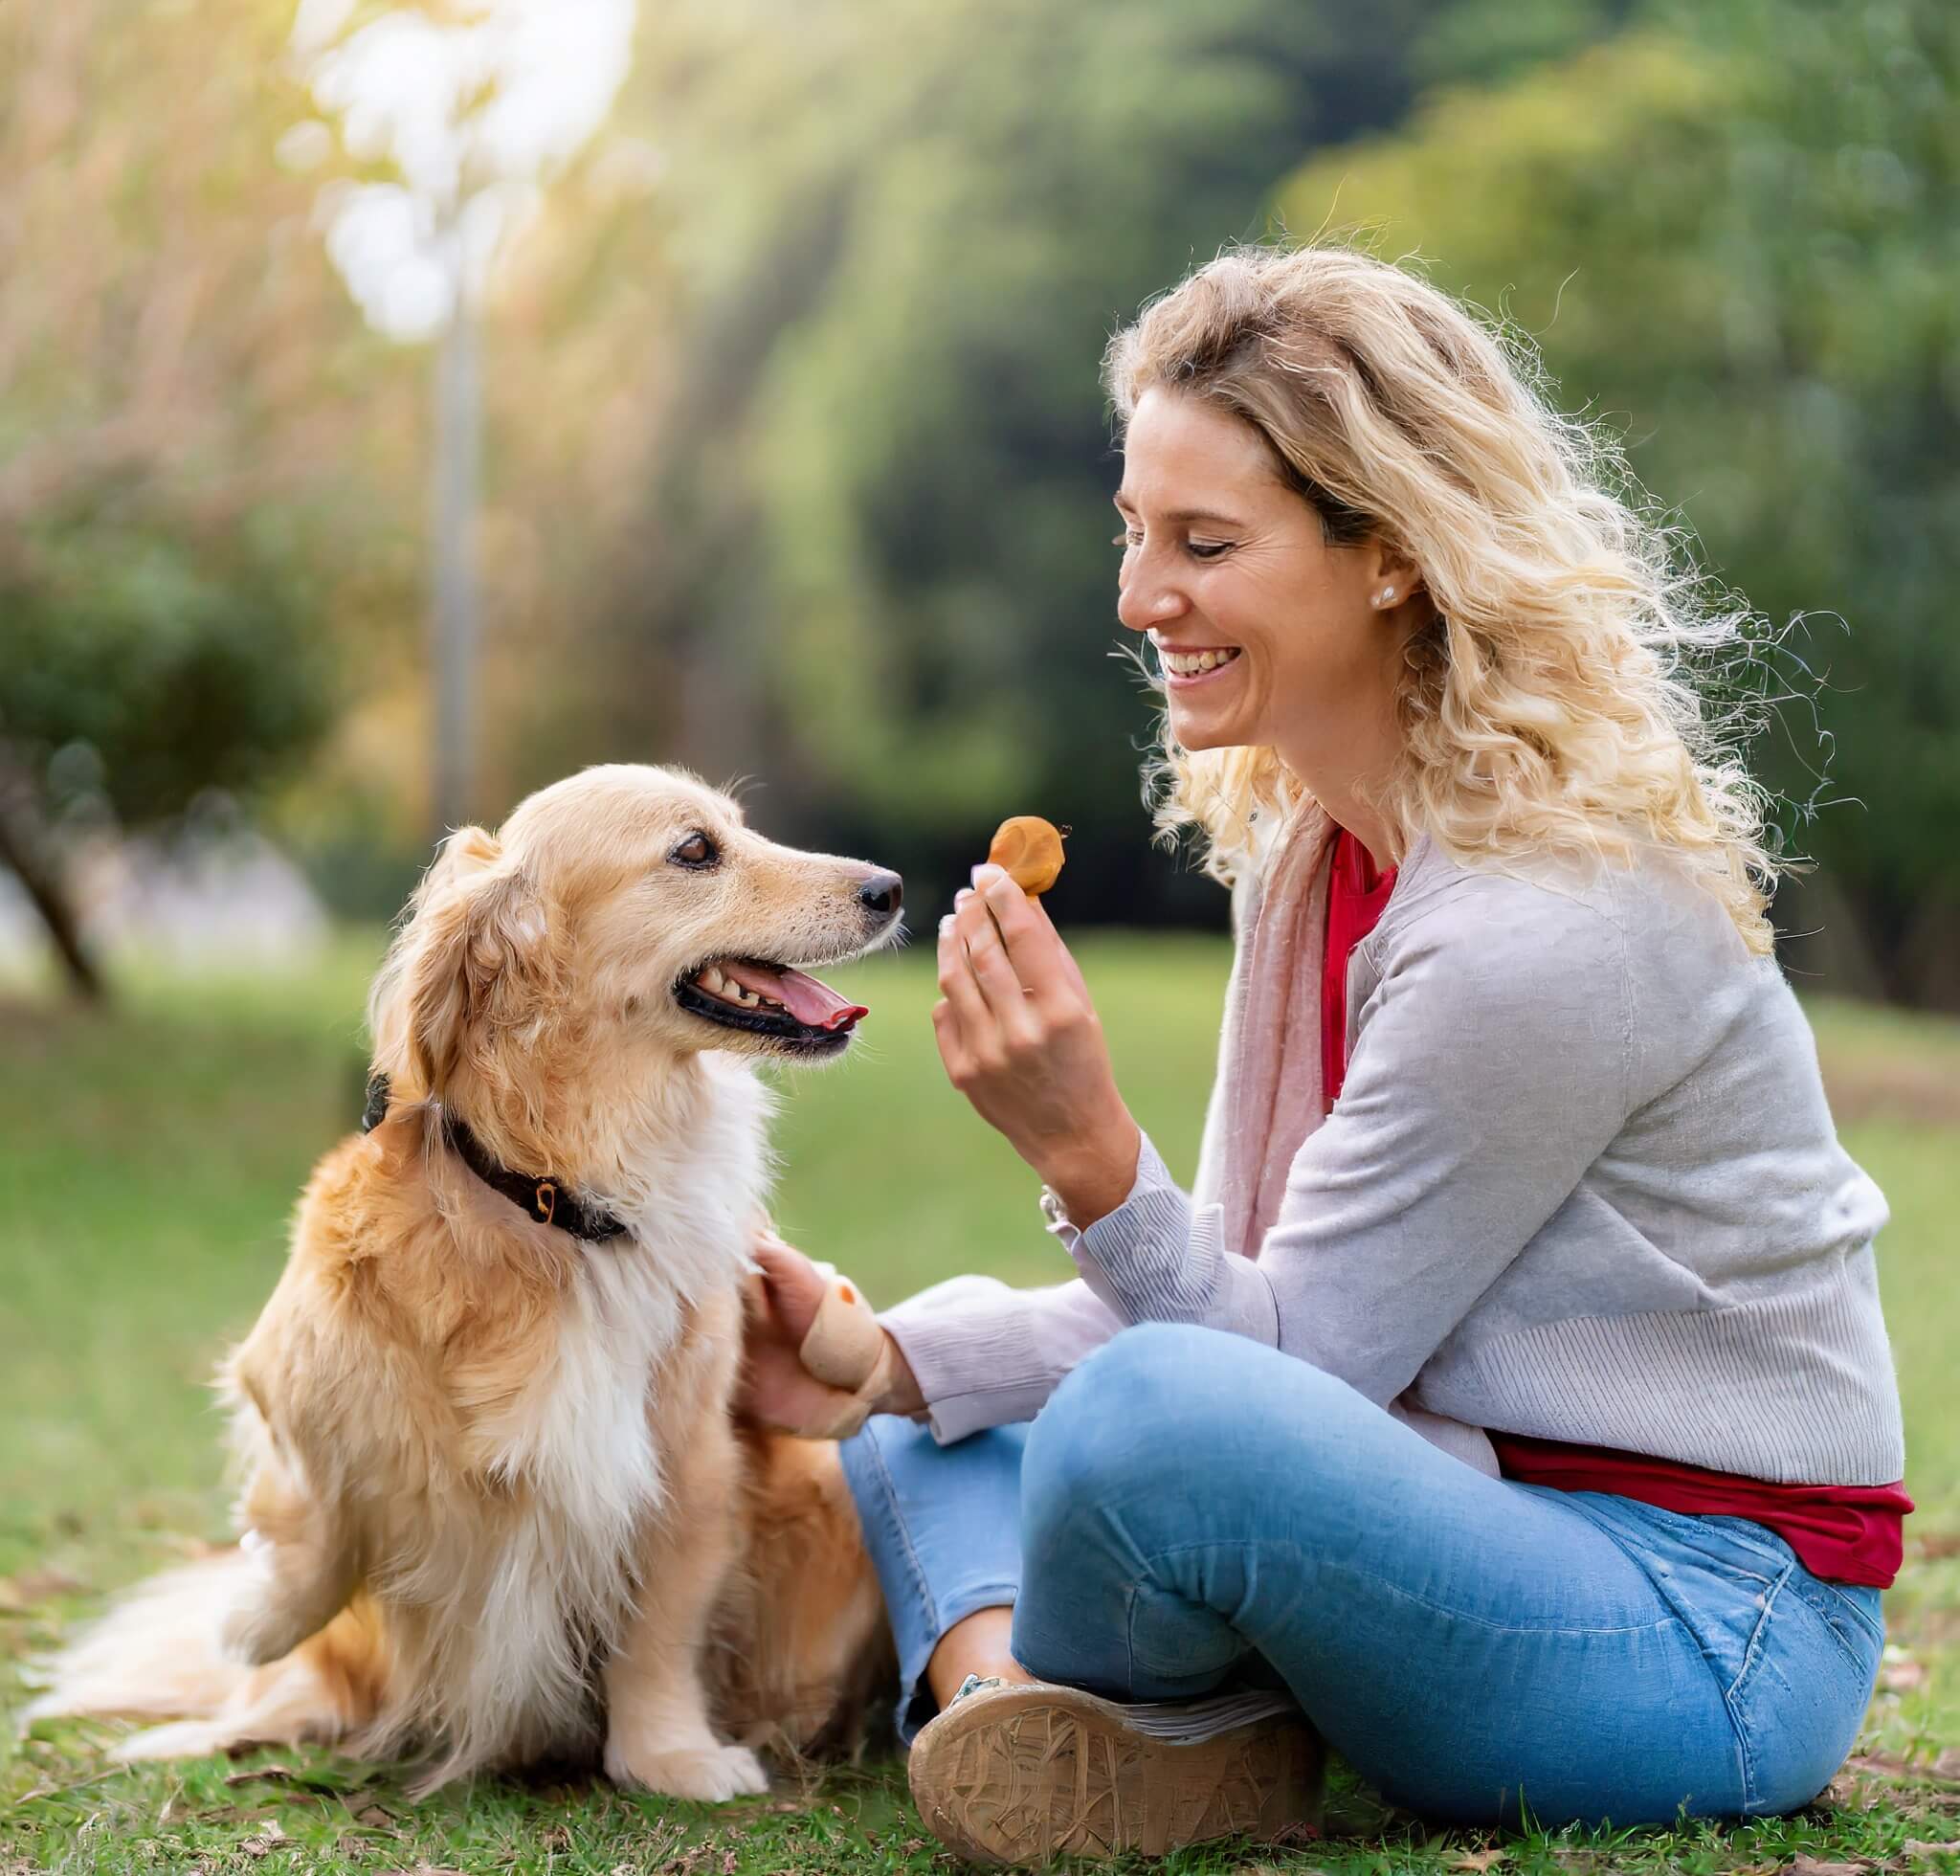 Owner training a happy dog with a treat in a sunny park